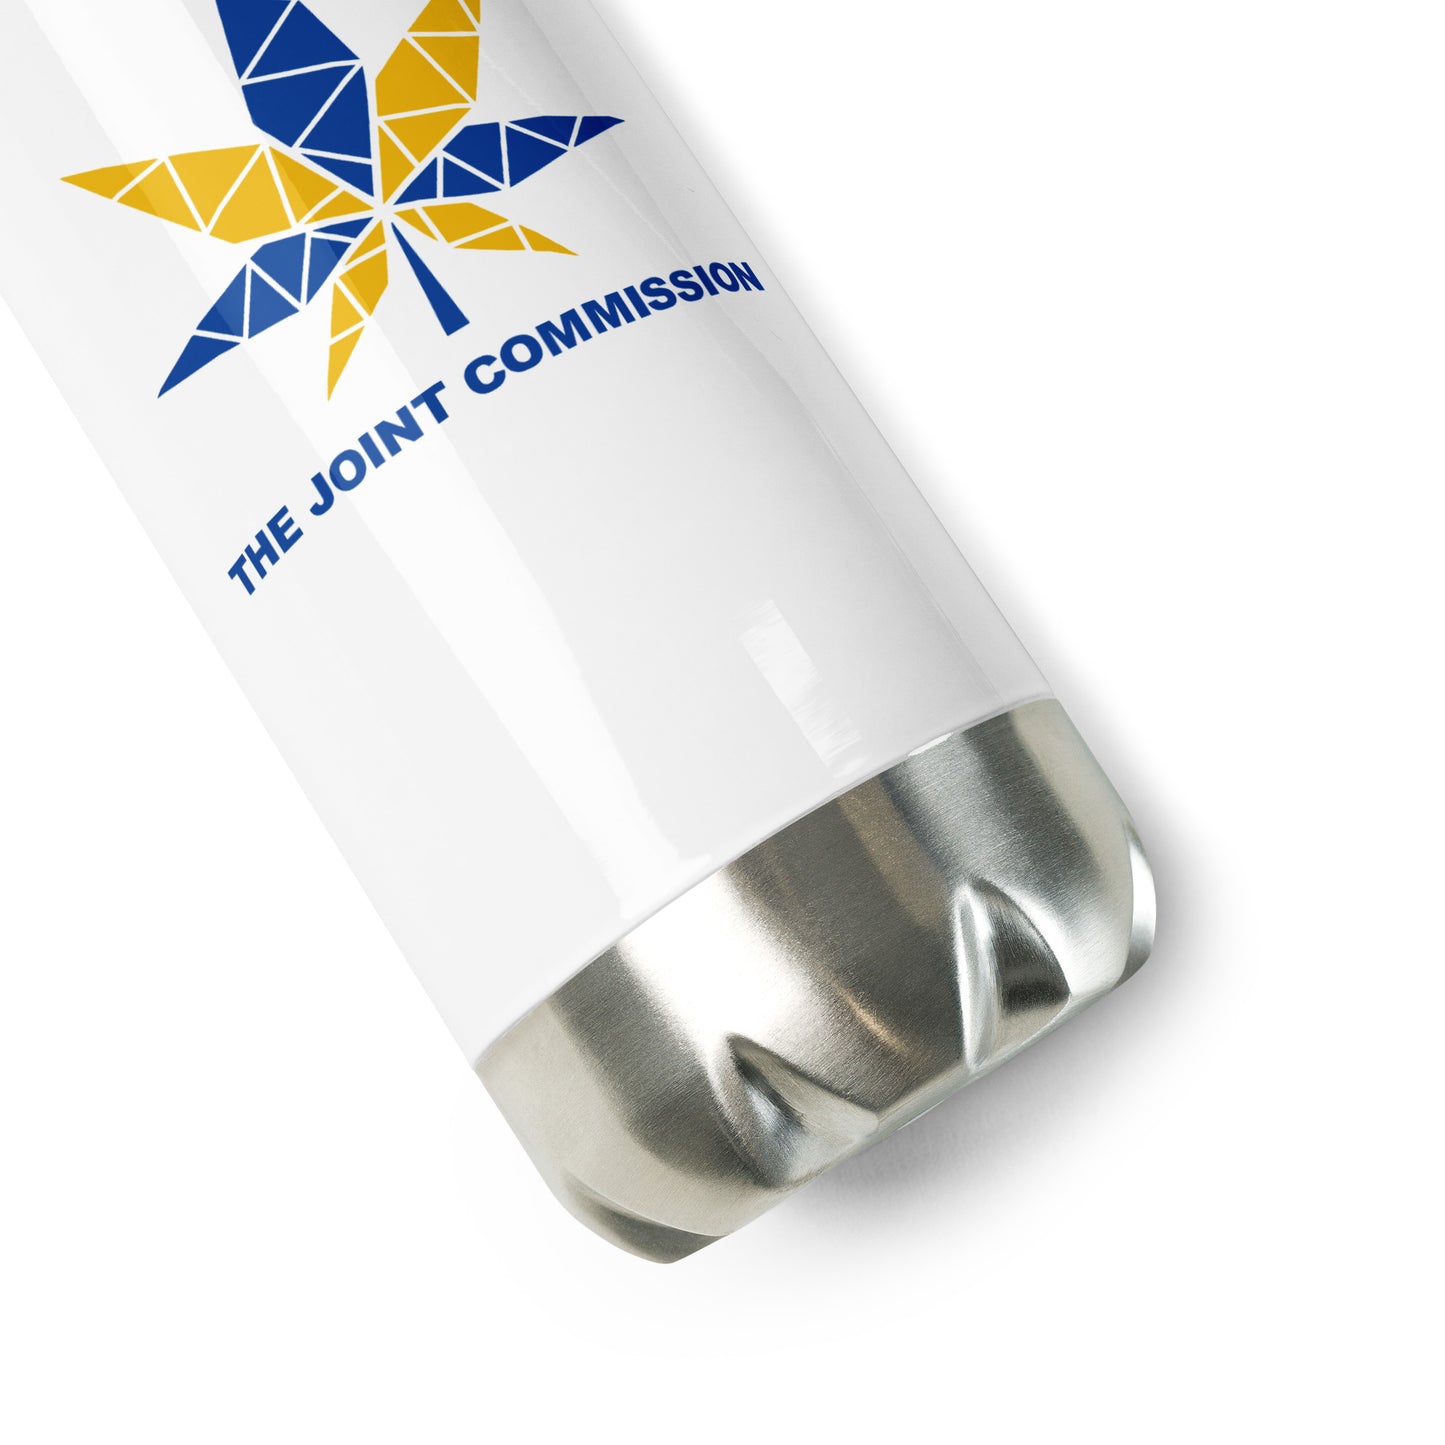 The Joint Commission Water Bottle